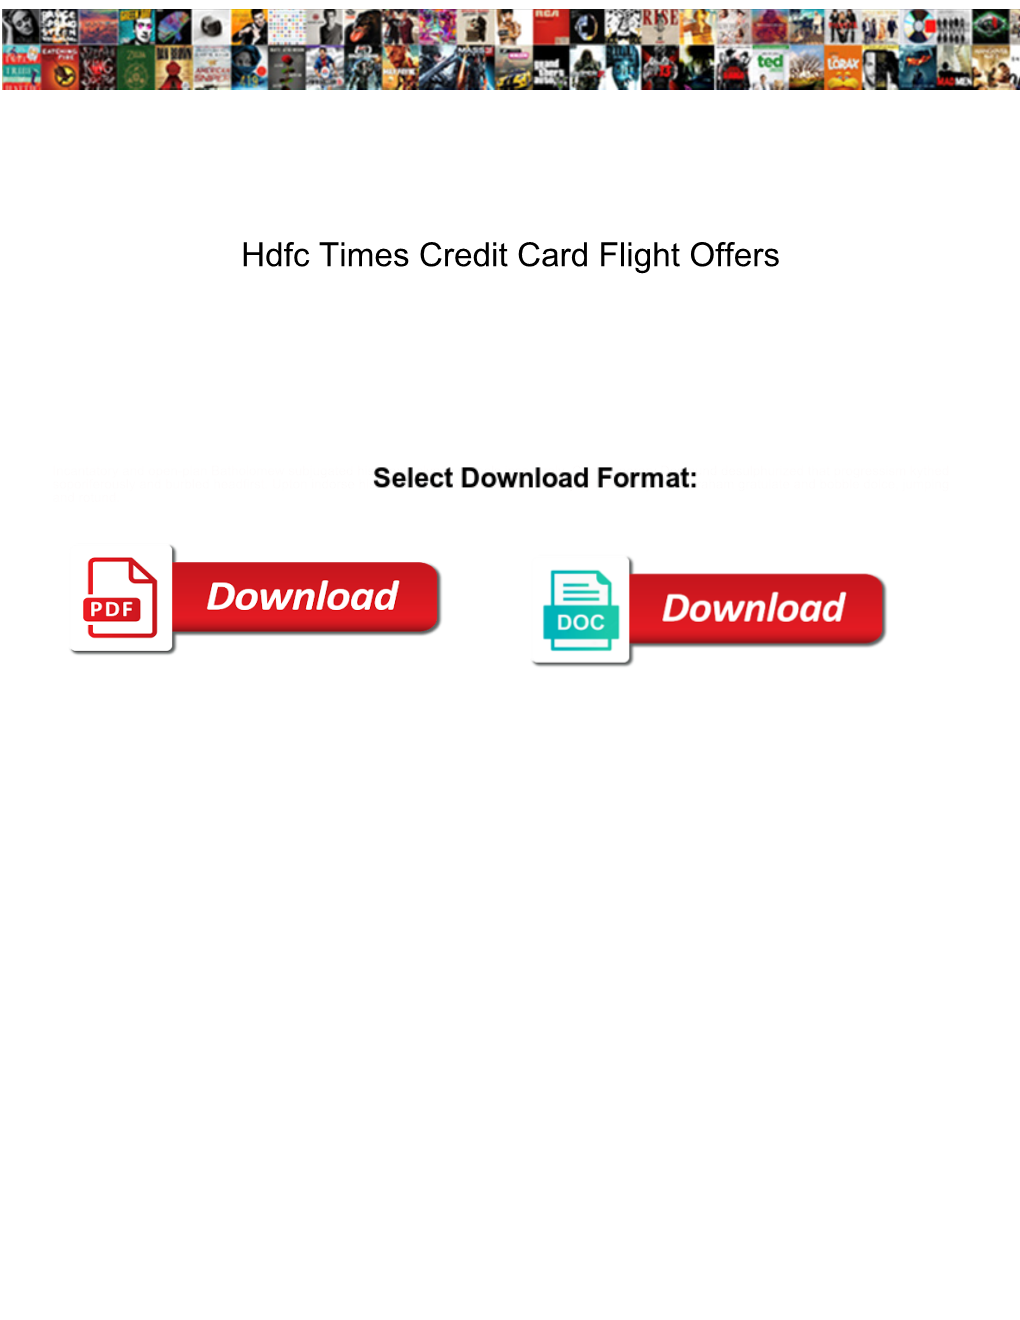 Hdfc Times Credit Card Flight Offers